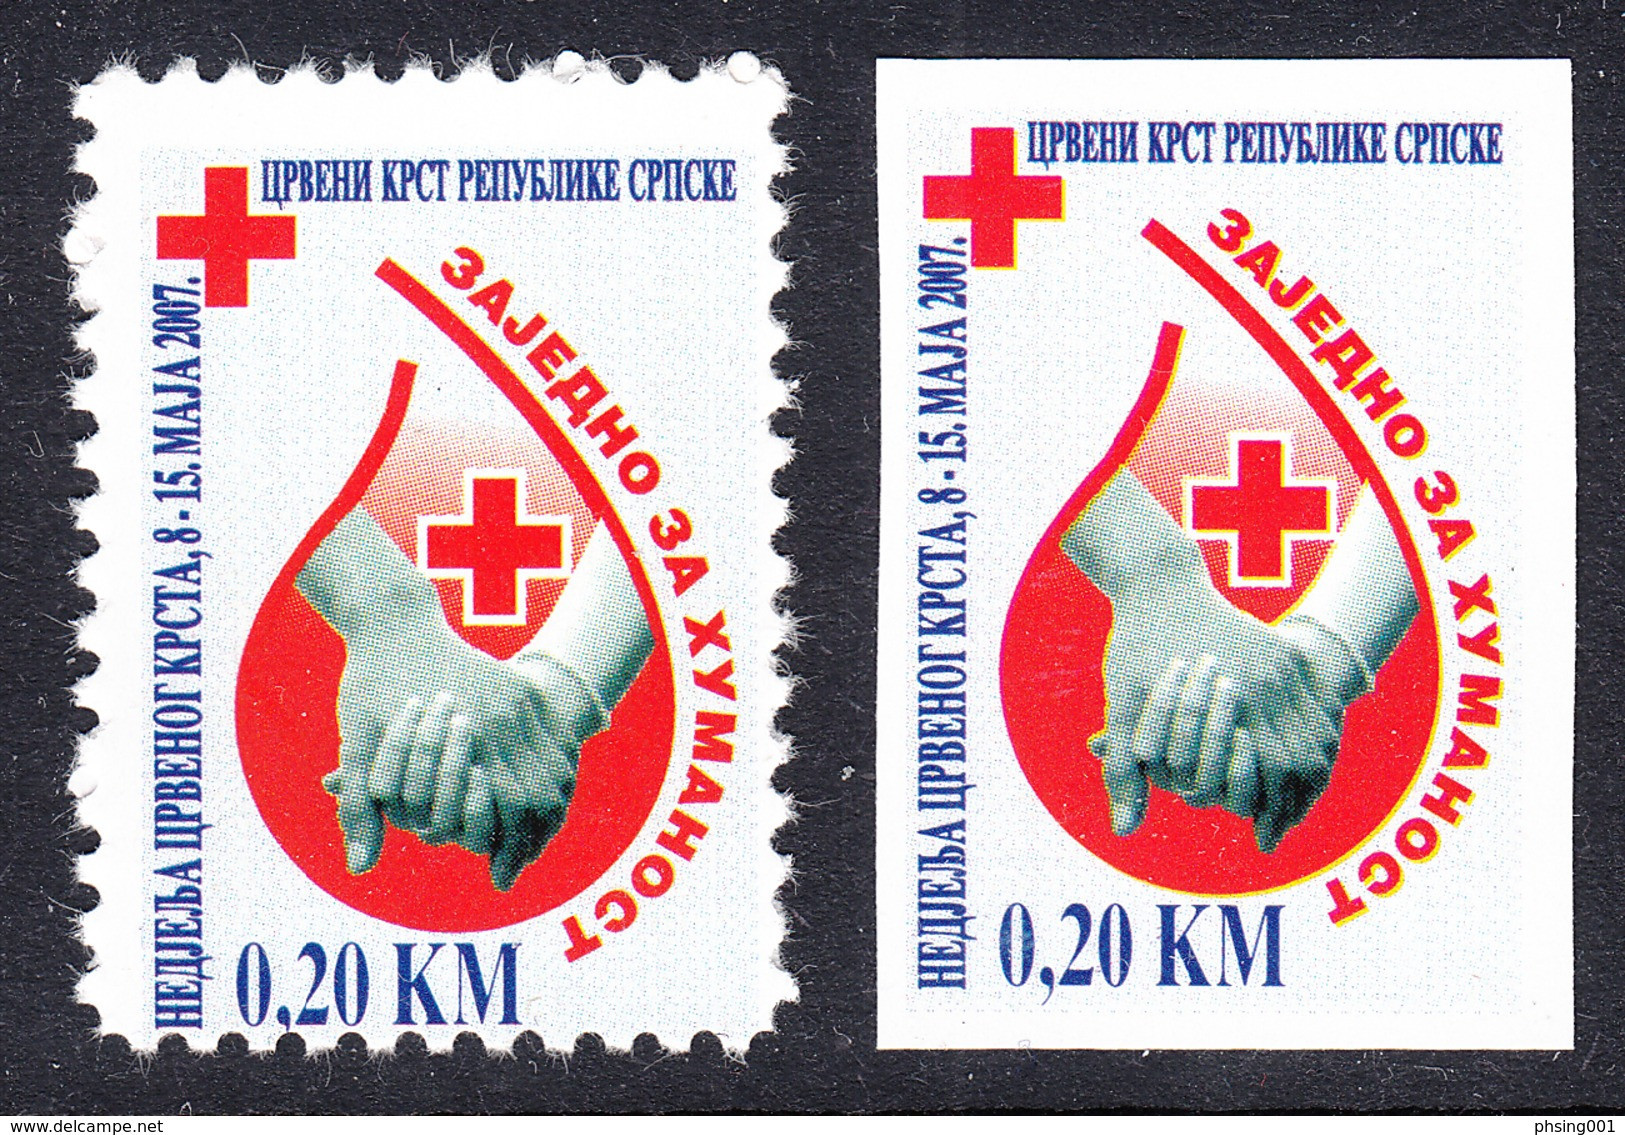 Bosnia Serbia 2007 Red Cross Rotes Kreuz Croix Rouge, Tax Charity Surcharge, Perforated + Imperforated Stamp MNH - Bosnia And Herzegovina